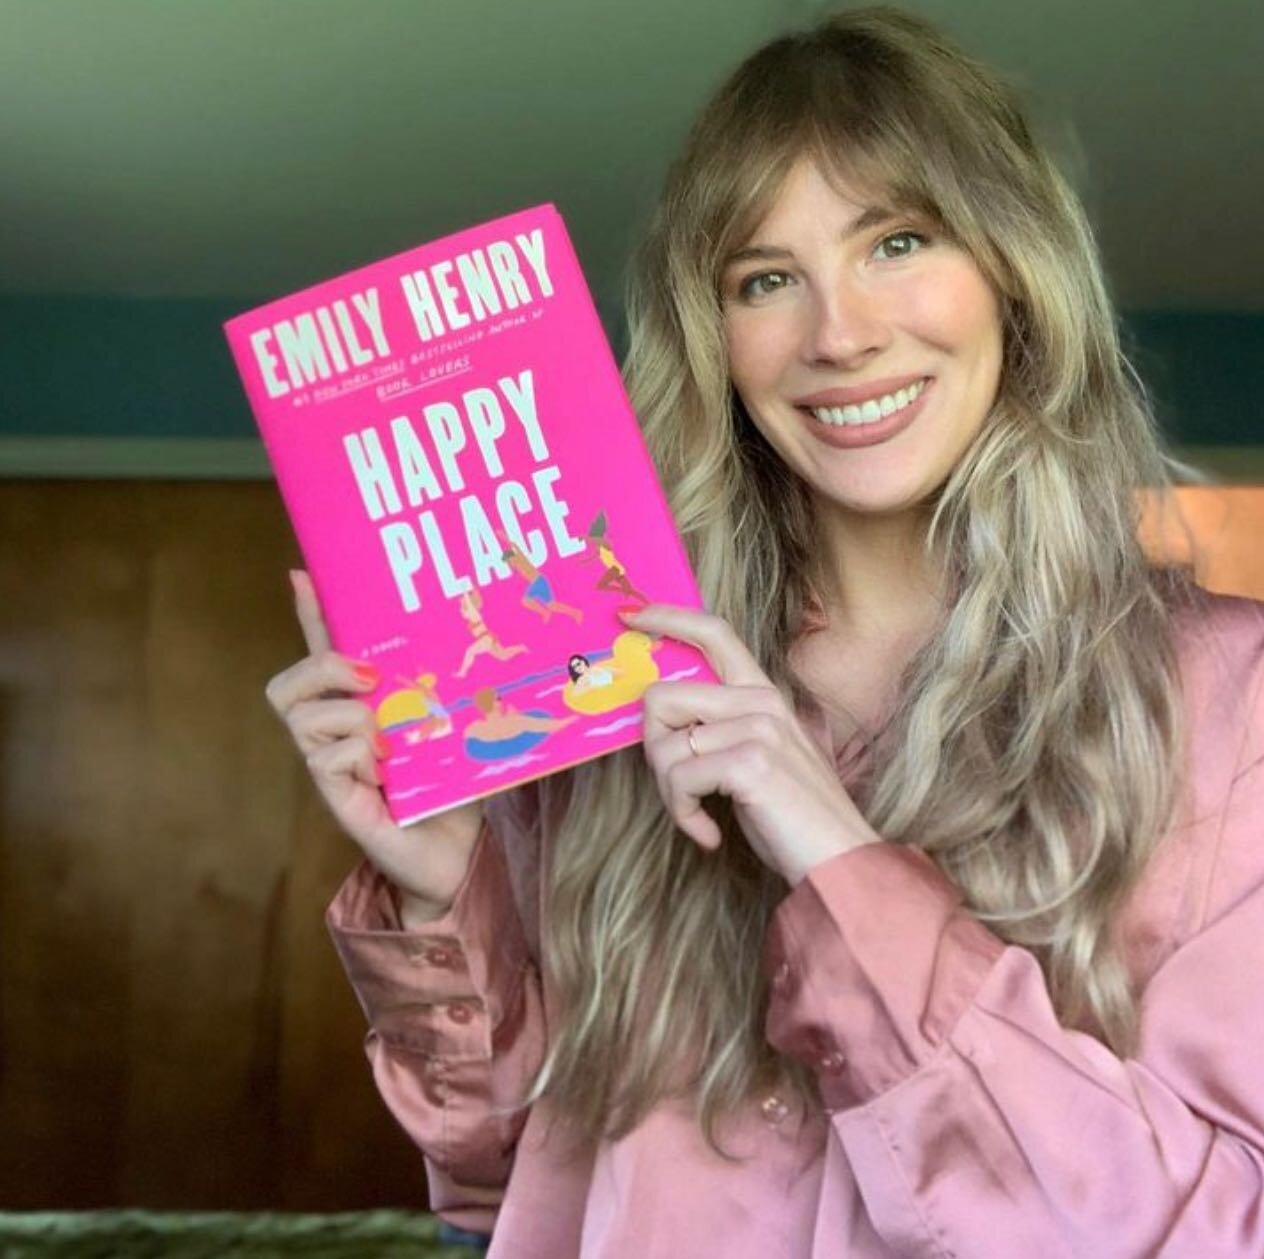 New month = New Book Club Pick!! We're excited to announce our May Book Club Pick will be Happy Place by Emily Henry! We can't wait to discuss this book on May 31, keep reading to learn more about it!

Harriet and Wyn have been the perfect couple sin